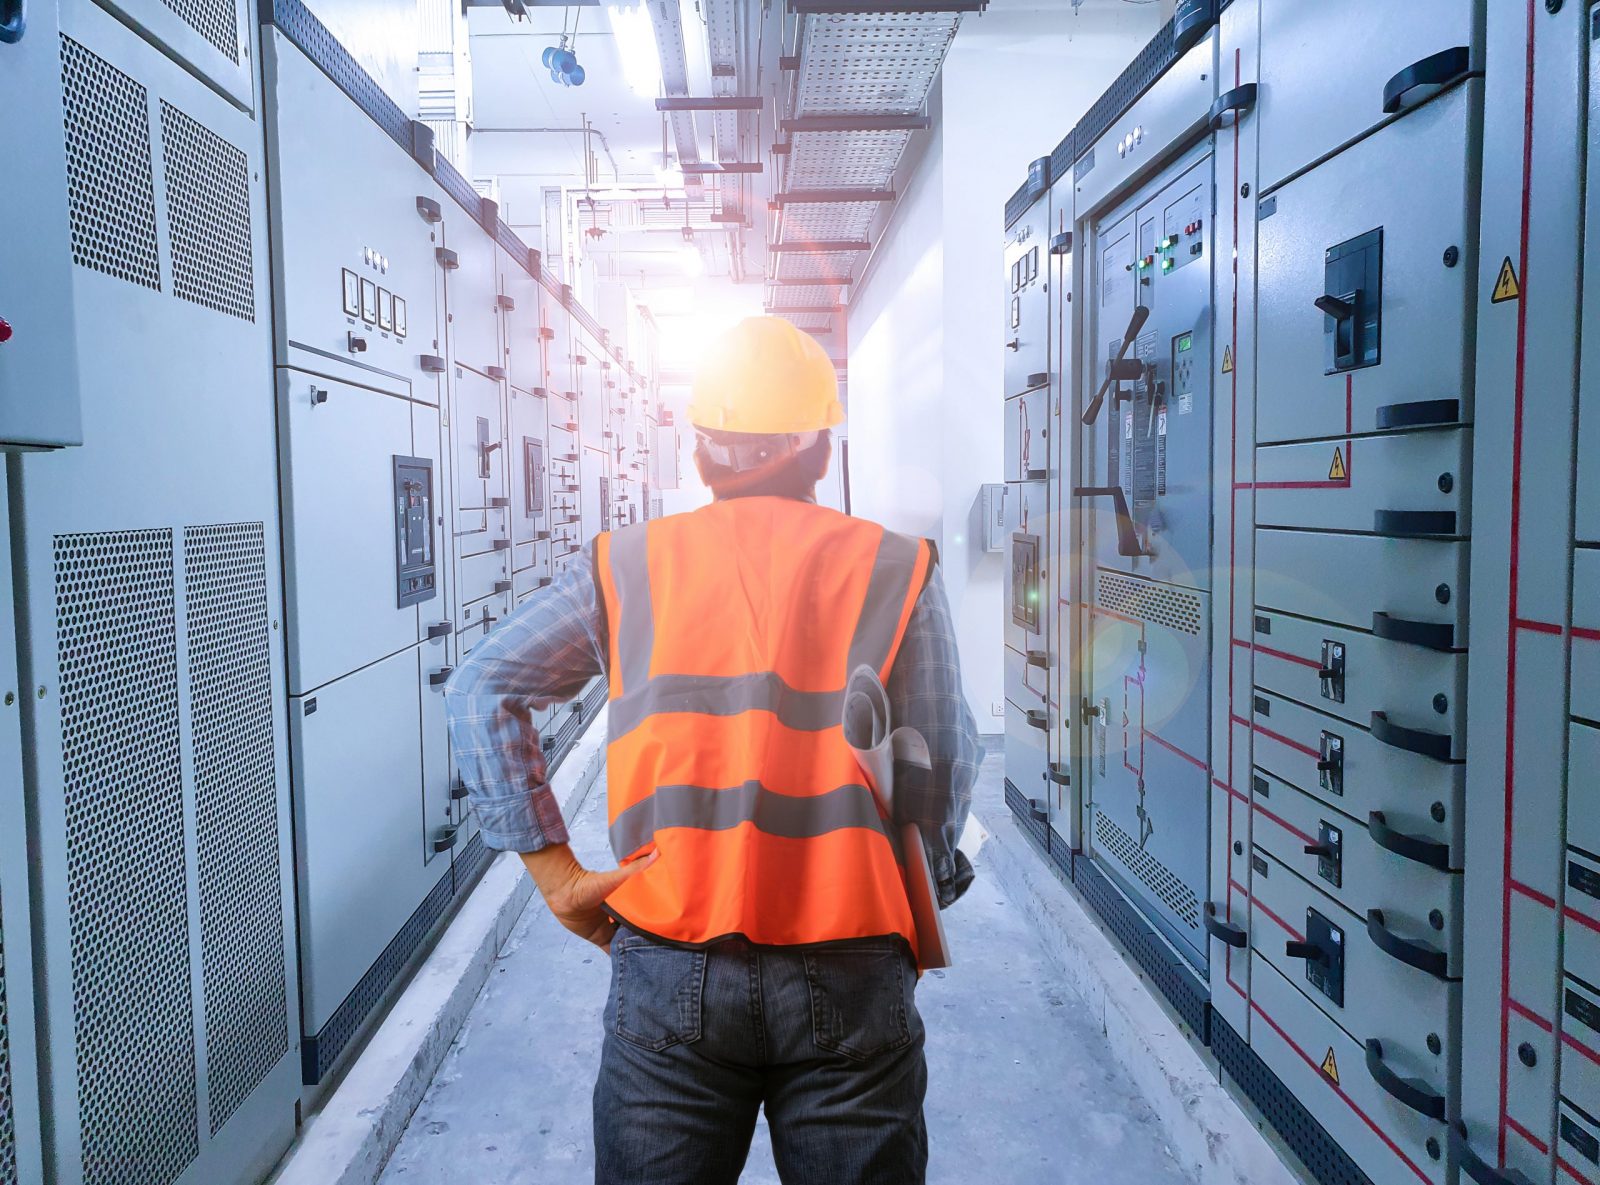 5 Electrical Evaluations that Help Ensure Employee Safety & Business Continuity